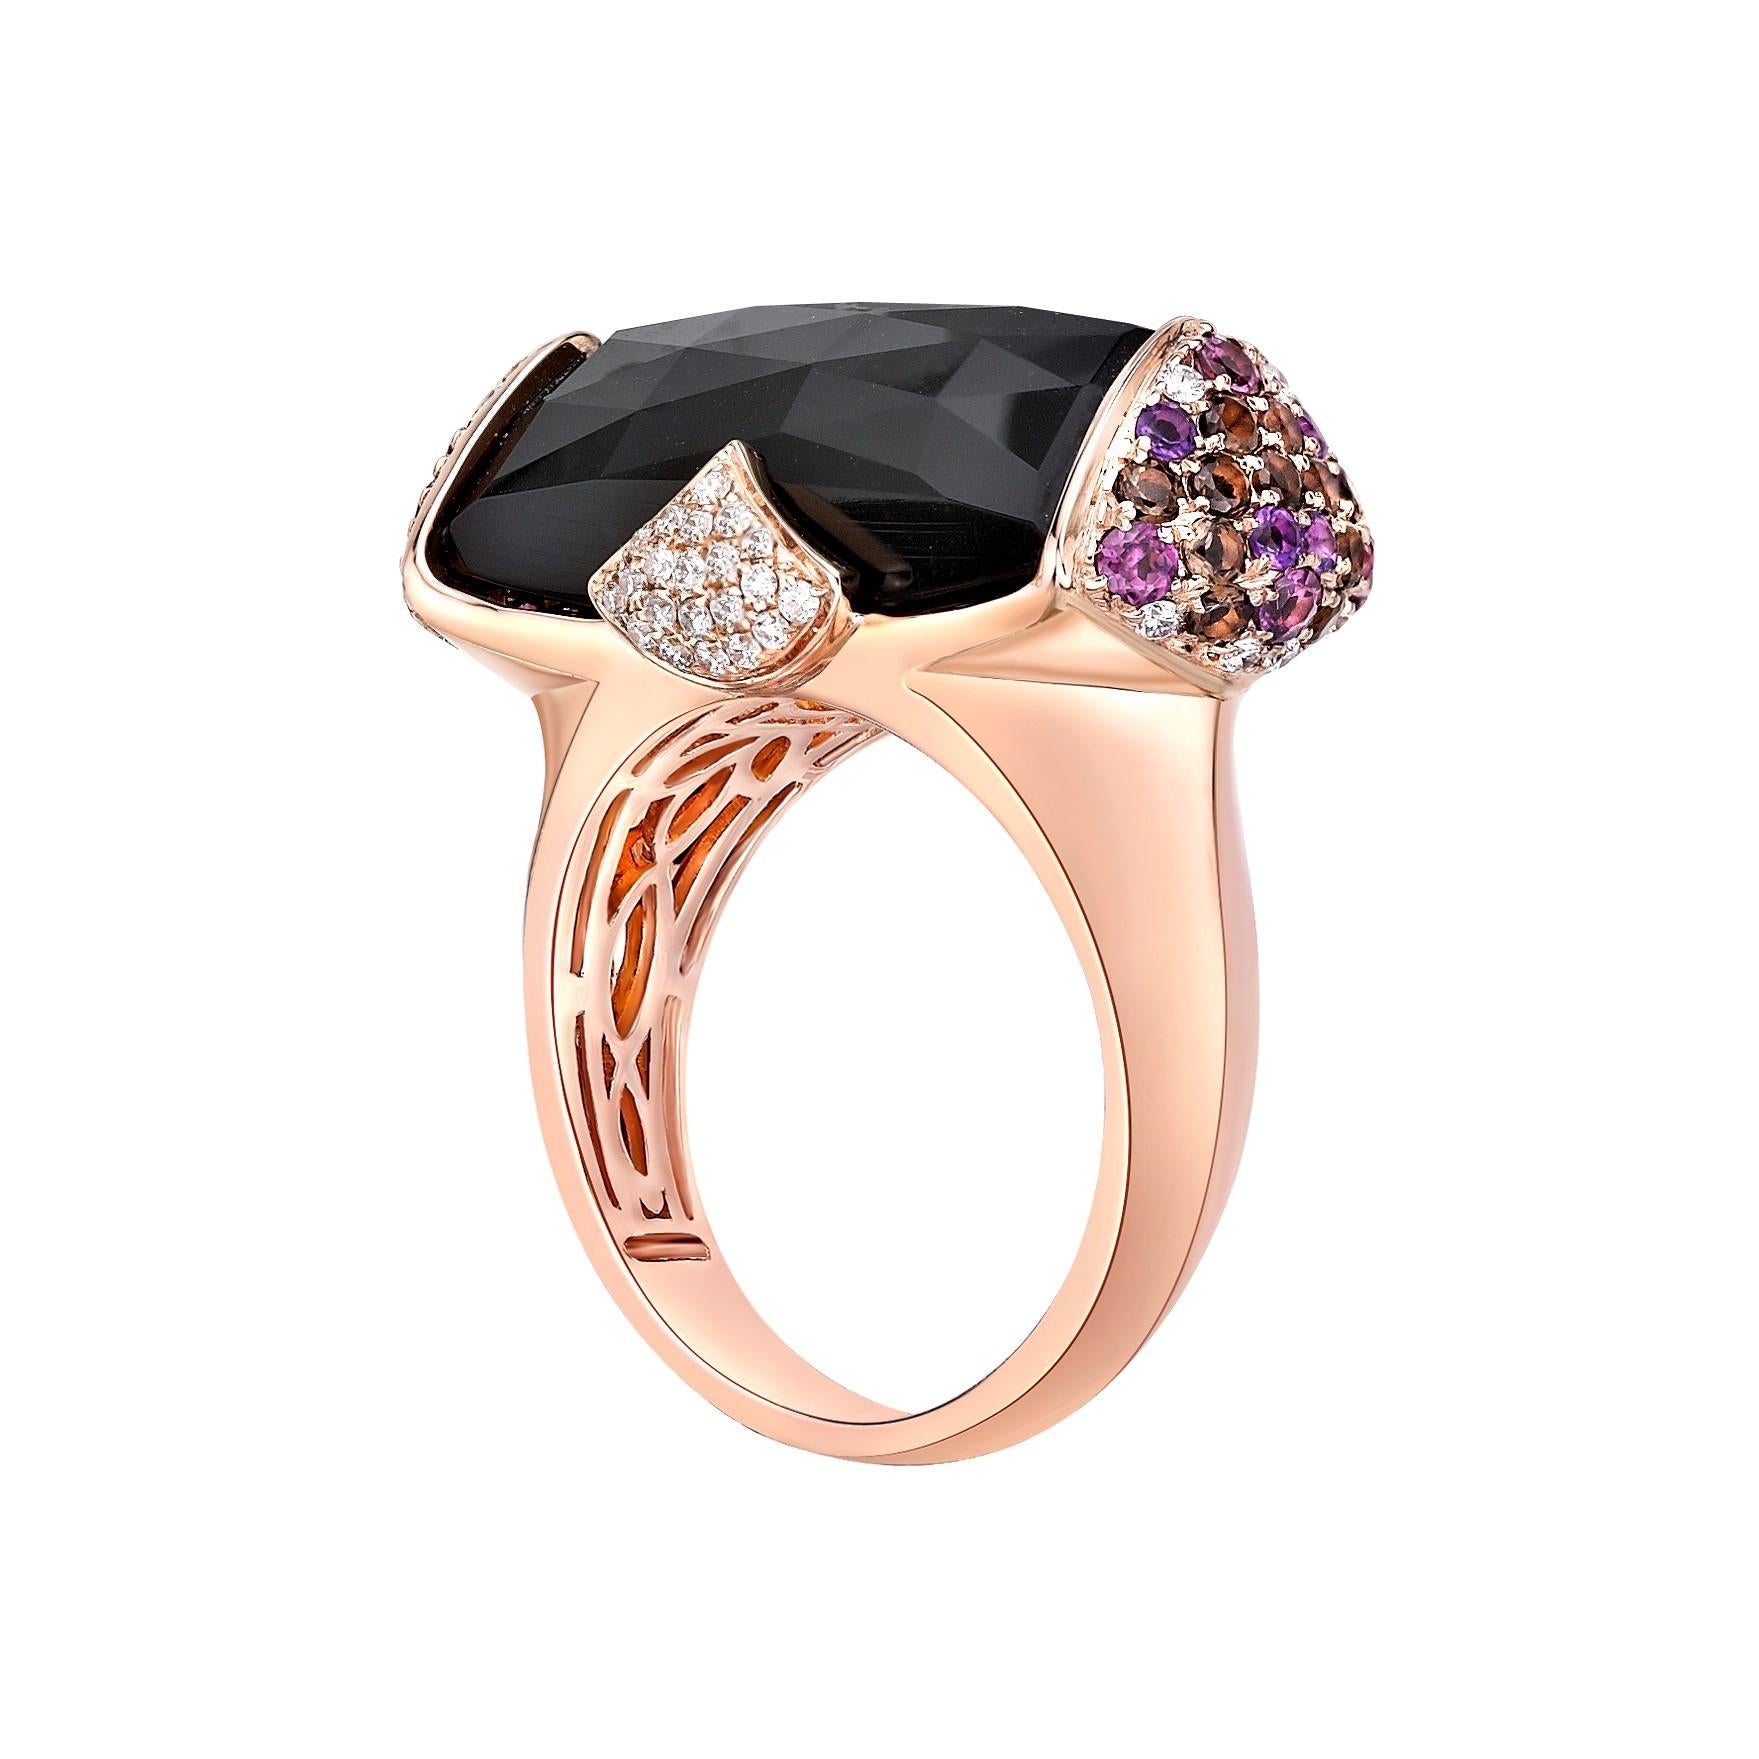 Briolette Cut 45 Carat Black Onyx Ring and Earring Set in 18 Karat Rose Gold with Diamonds For Sale